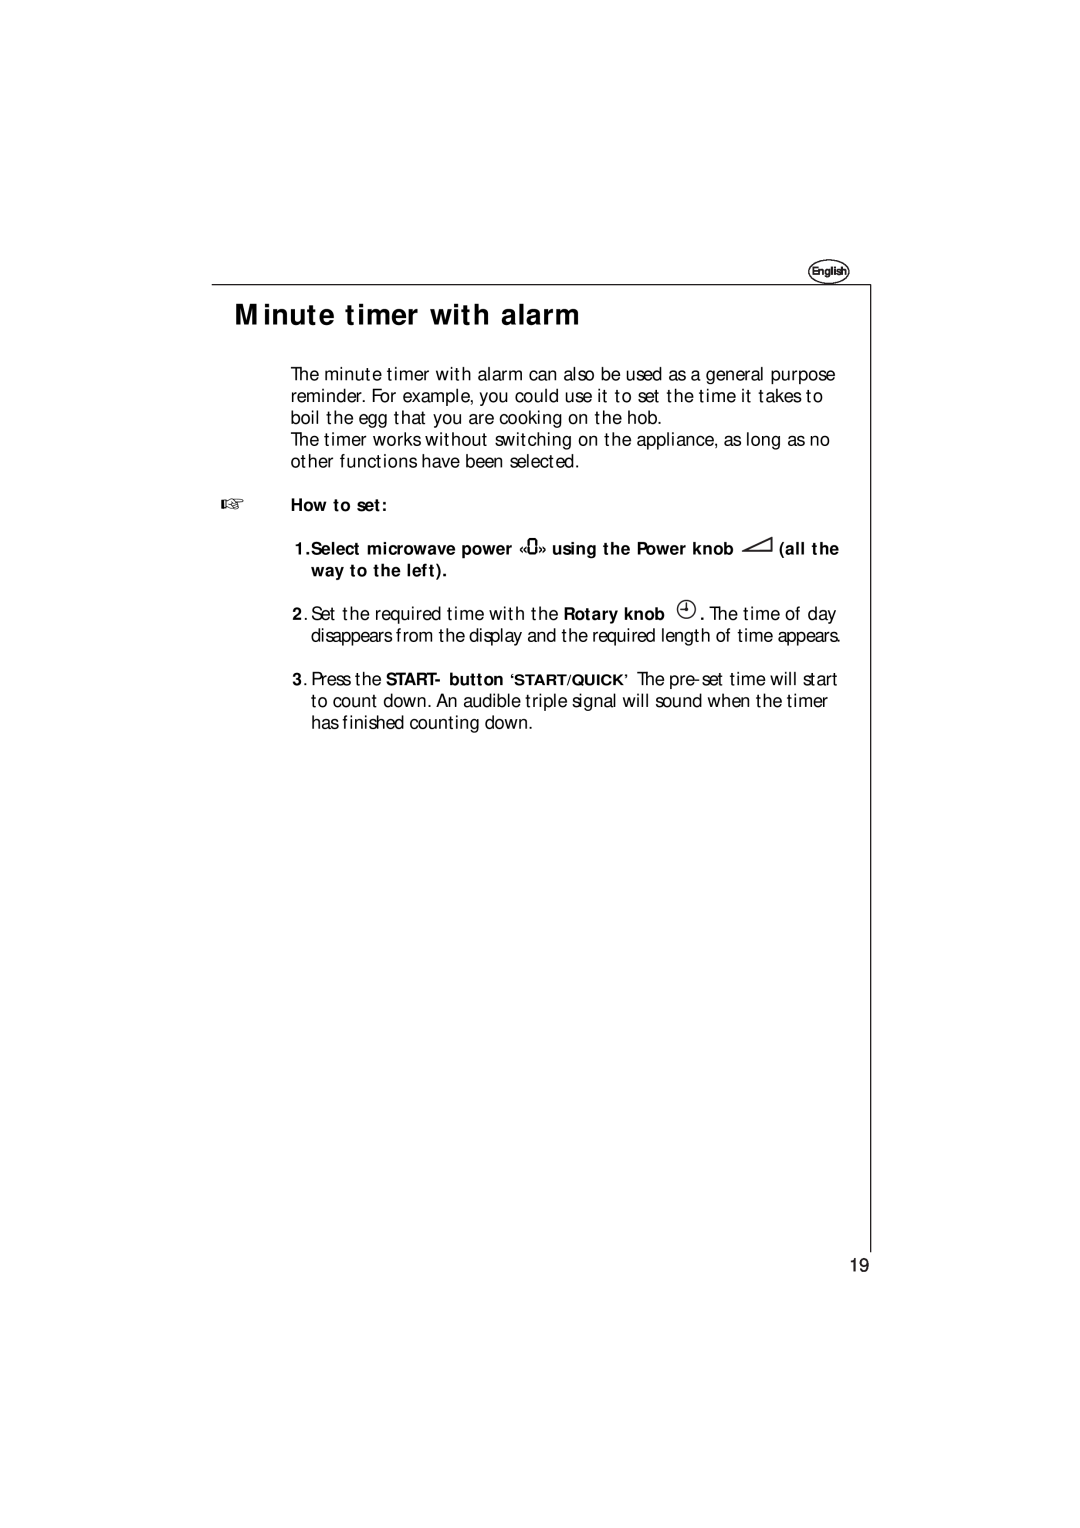 AEG 153 E manual Minute timer with alarm, How to set 